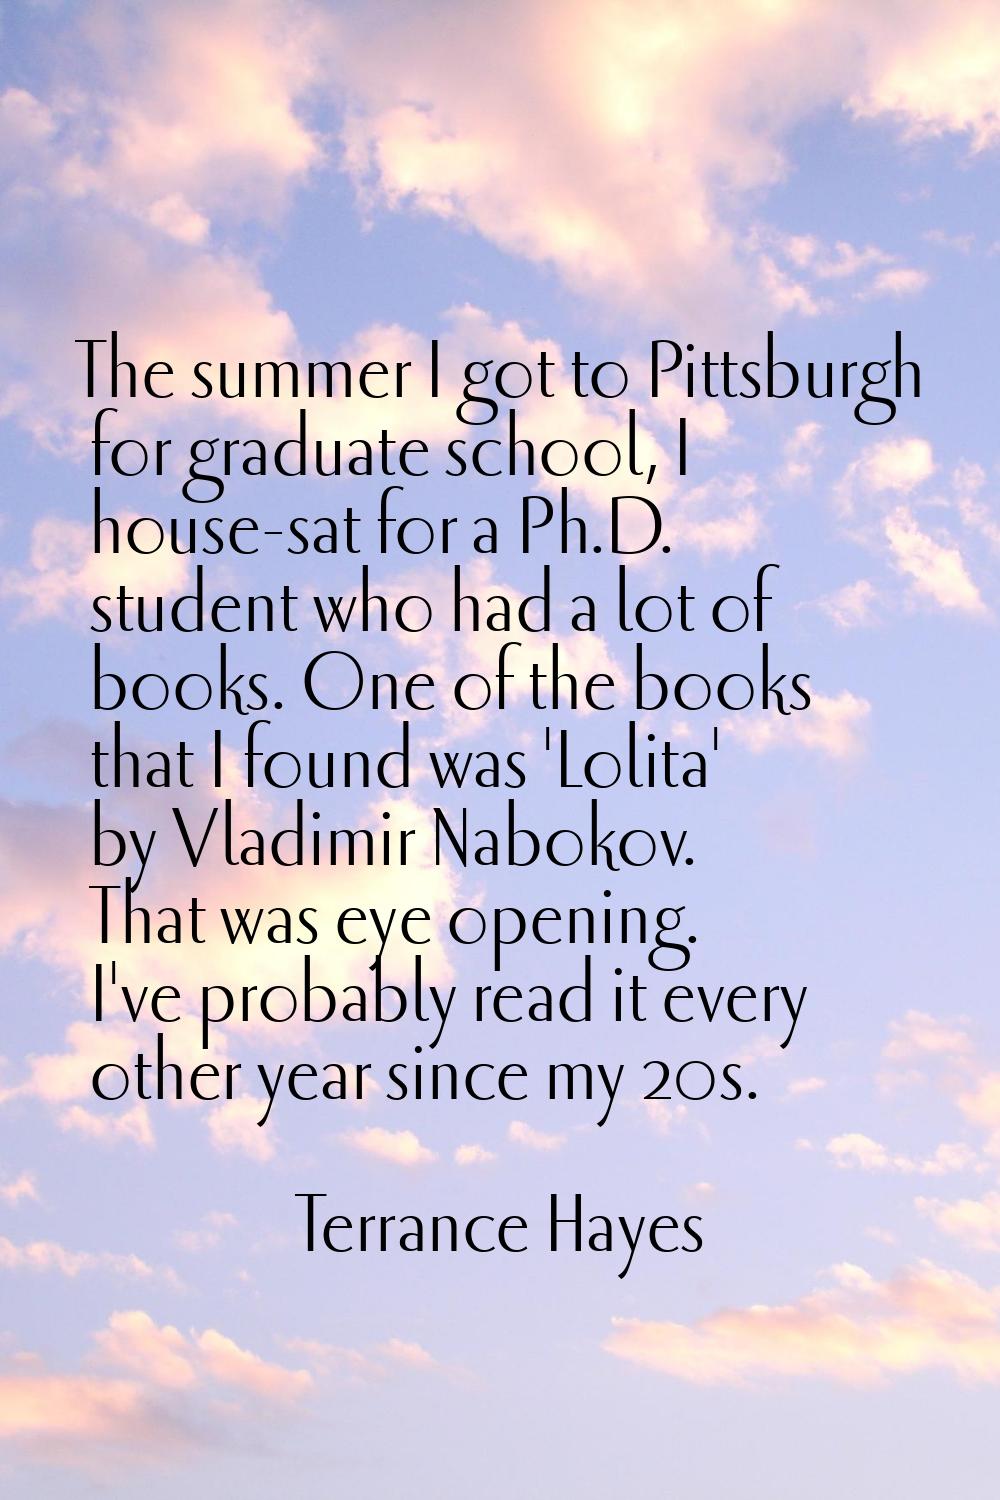 The summer I got to Pittsburgh for graduate school, I house-sat for a Ph.D. student who had a lot o